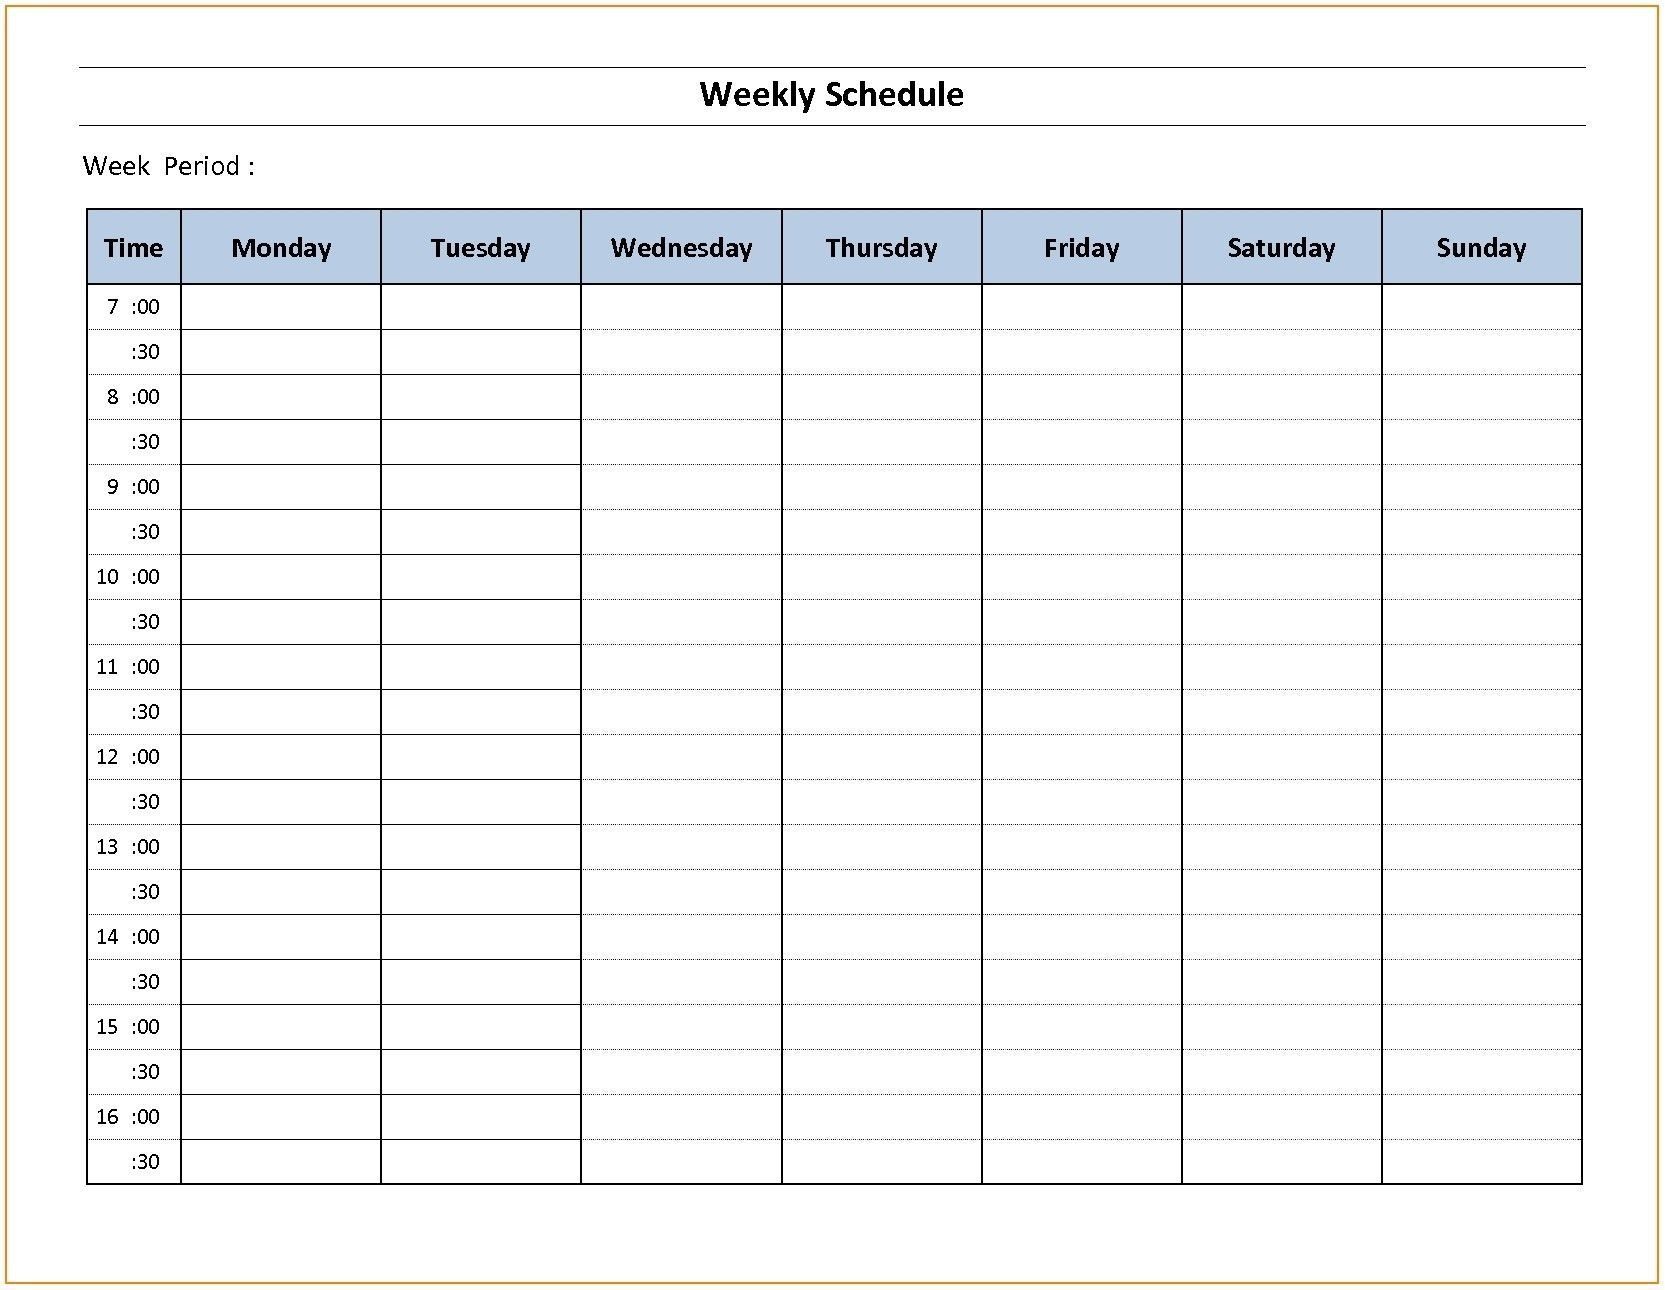 Weekly Schedule Monday Sunday In 2020 | Calendar Template, Weekly